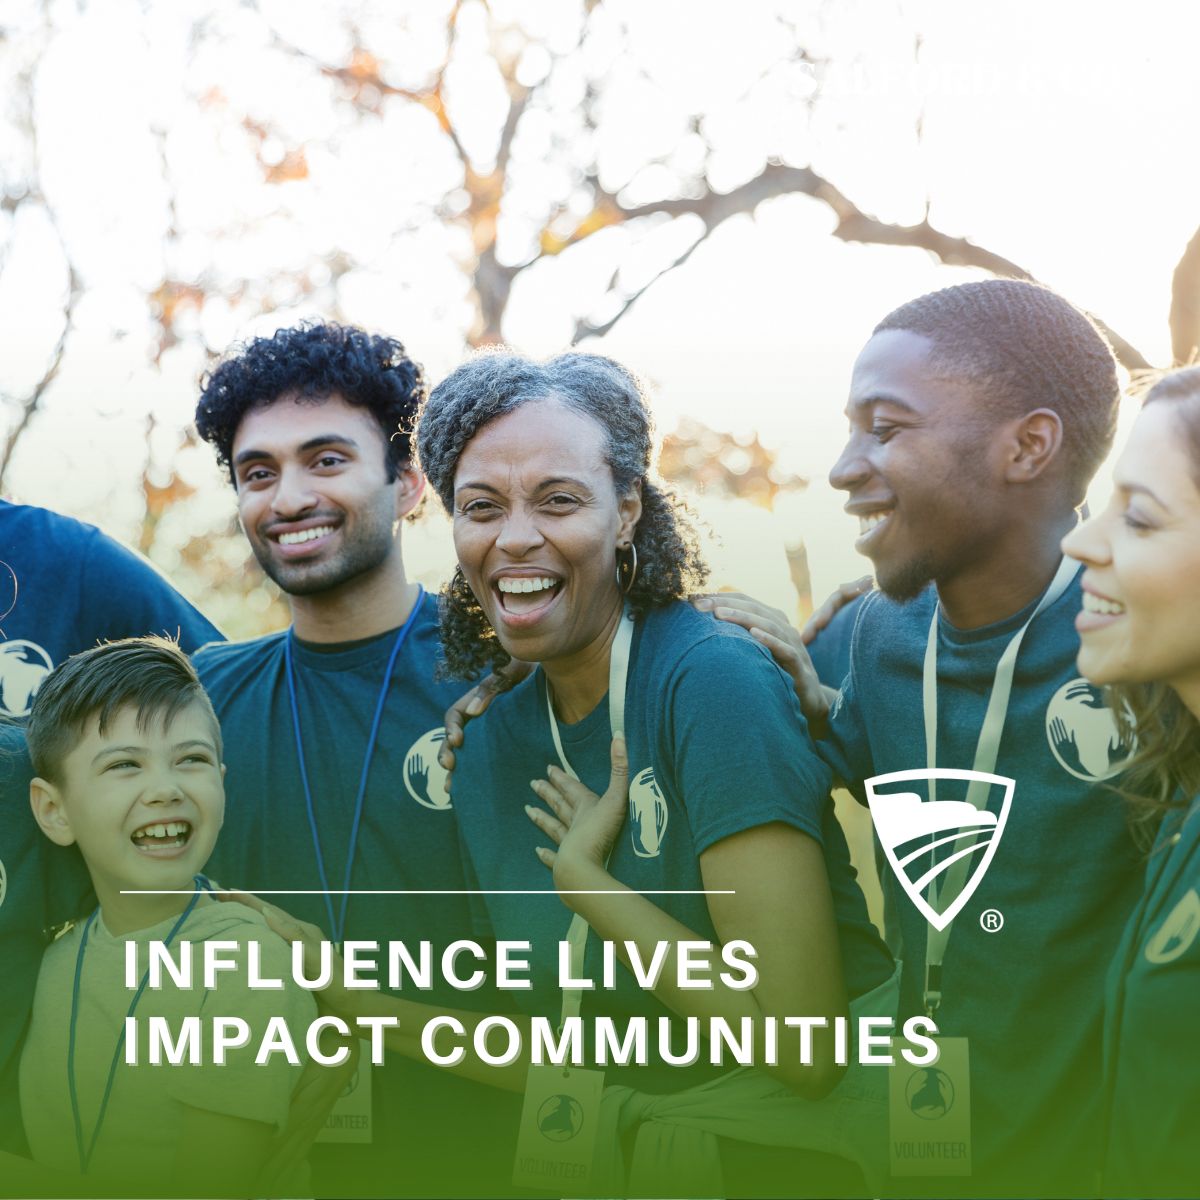 Want to make a difference right in your own community? At Modern Woodmen, you can make an impact while making an income. Contact me to find out how. 

#BeTheDifference